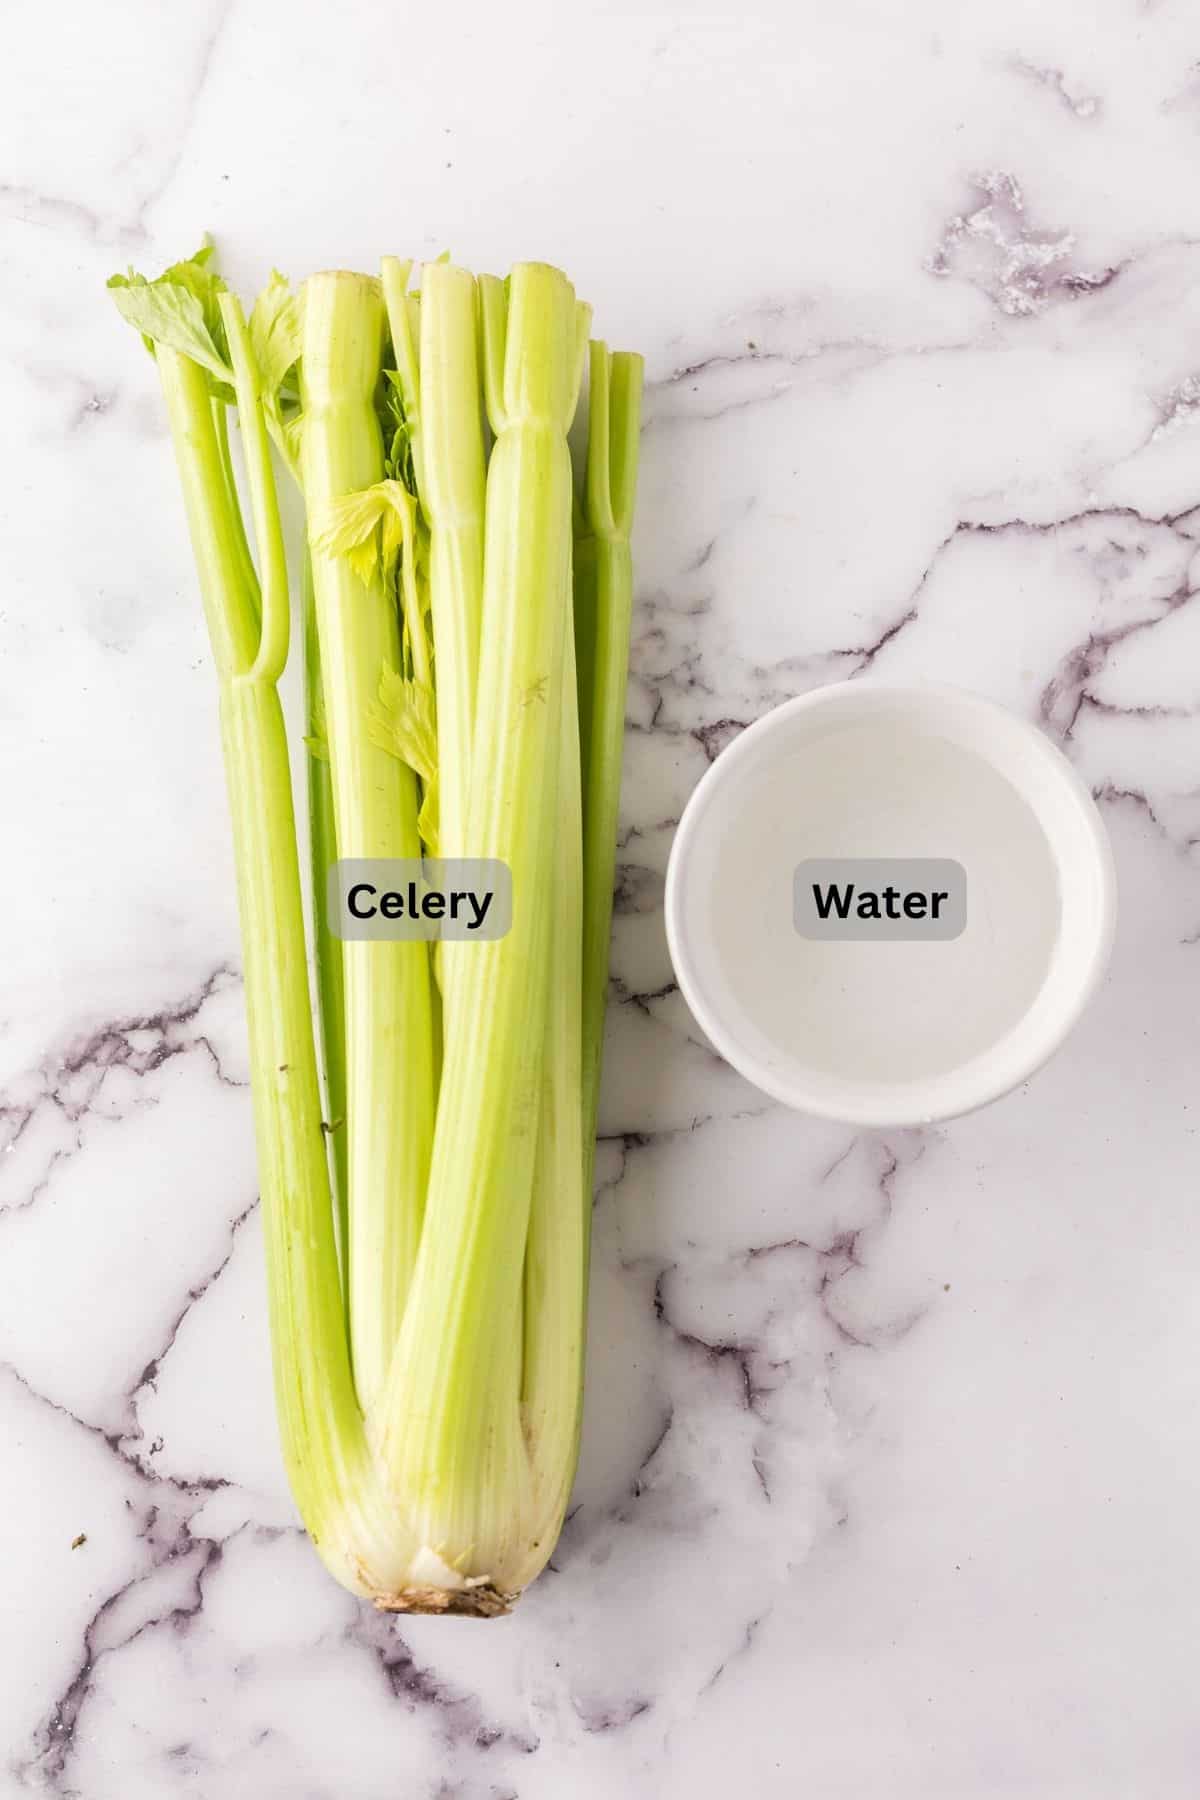 portion bowls each with digitally labeled raw ingredients to make celery juice.